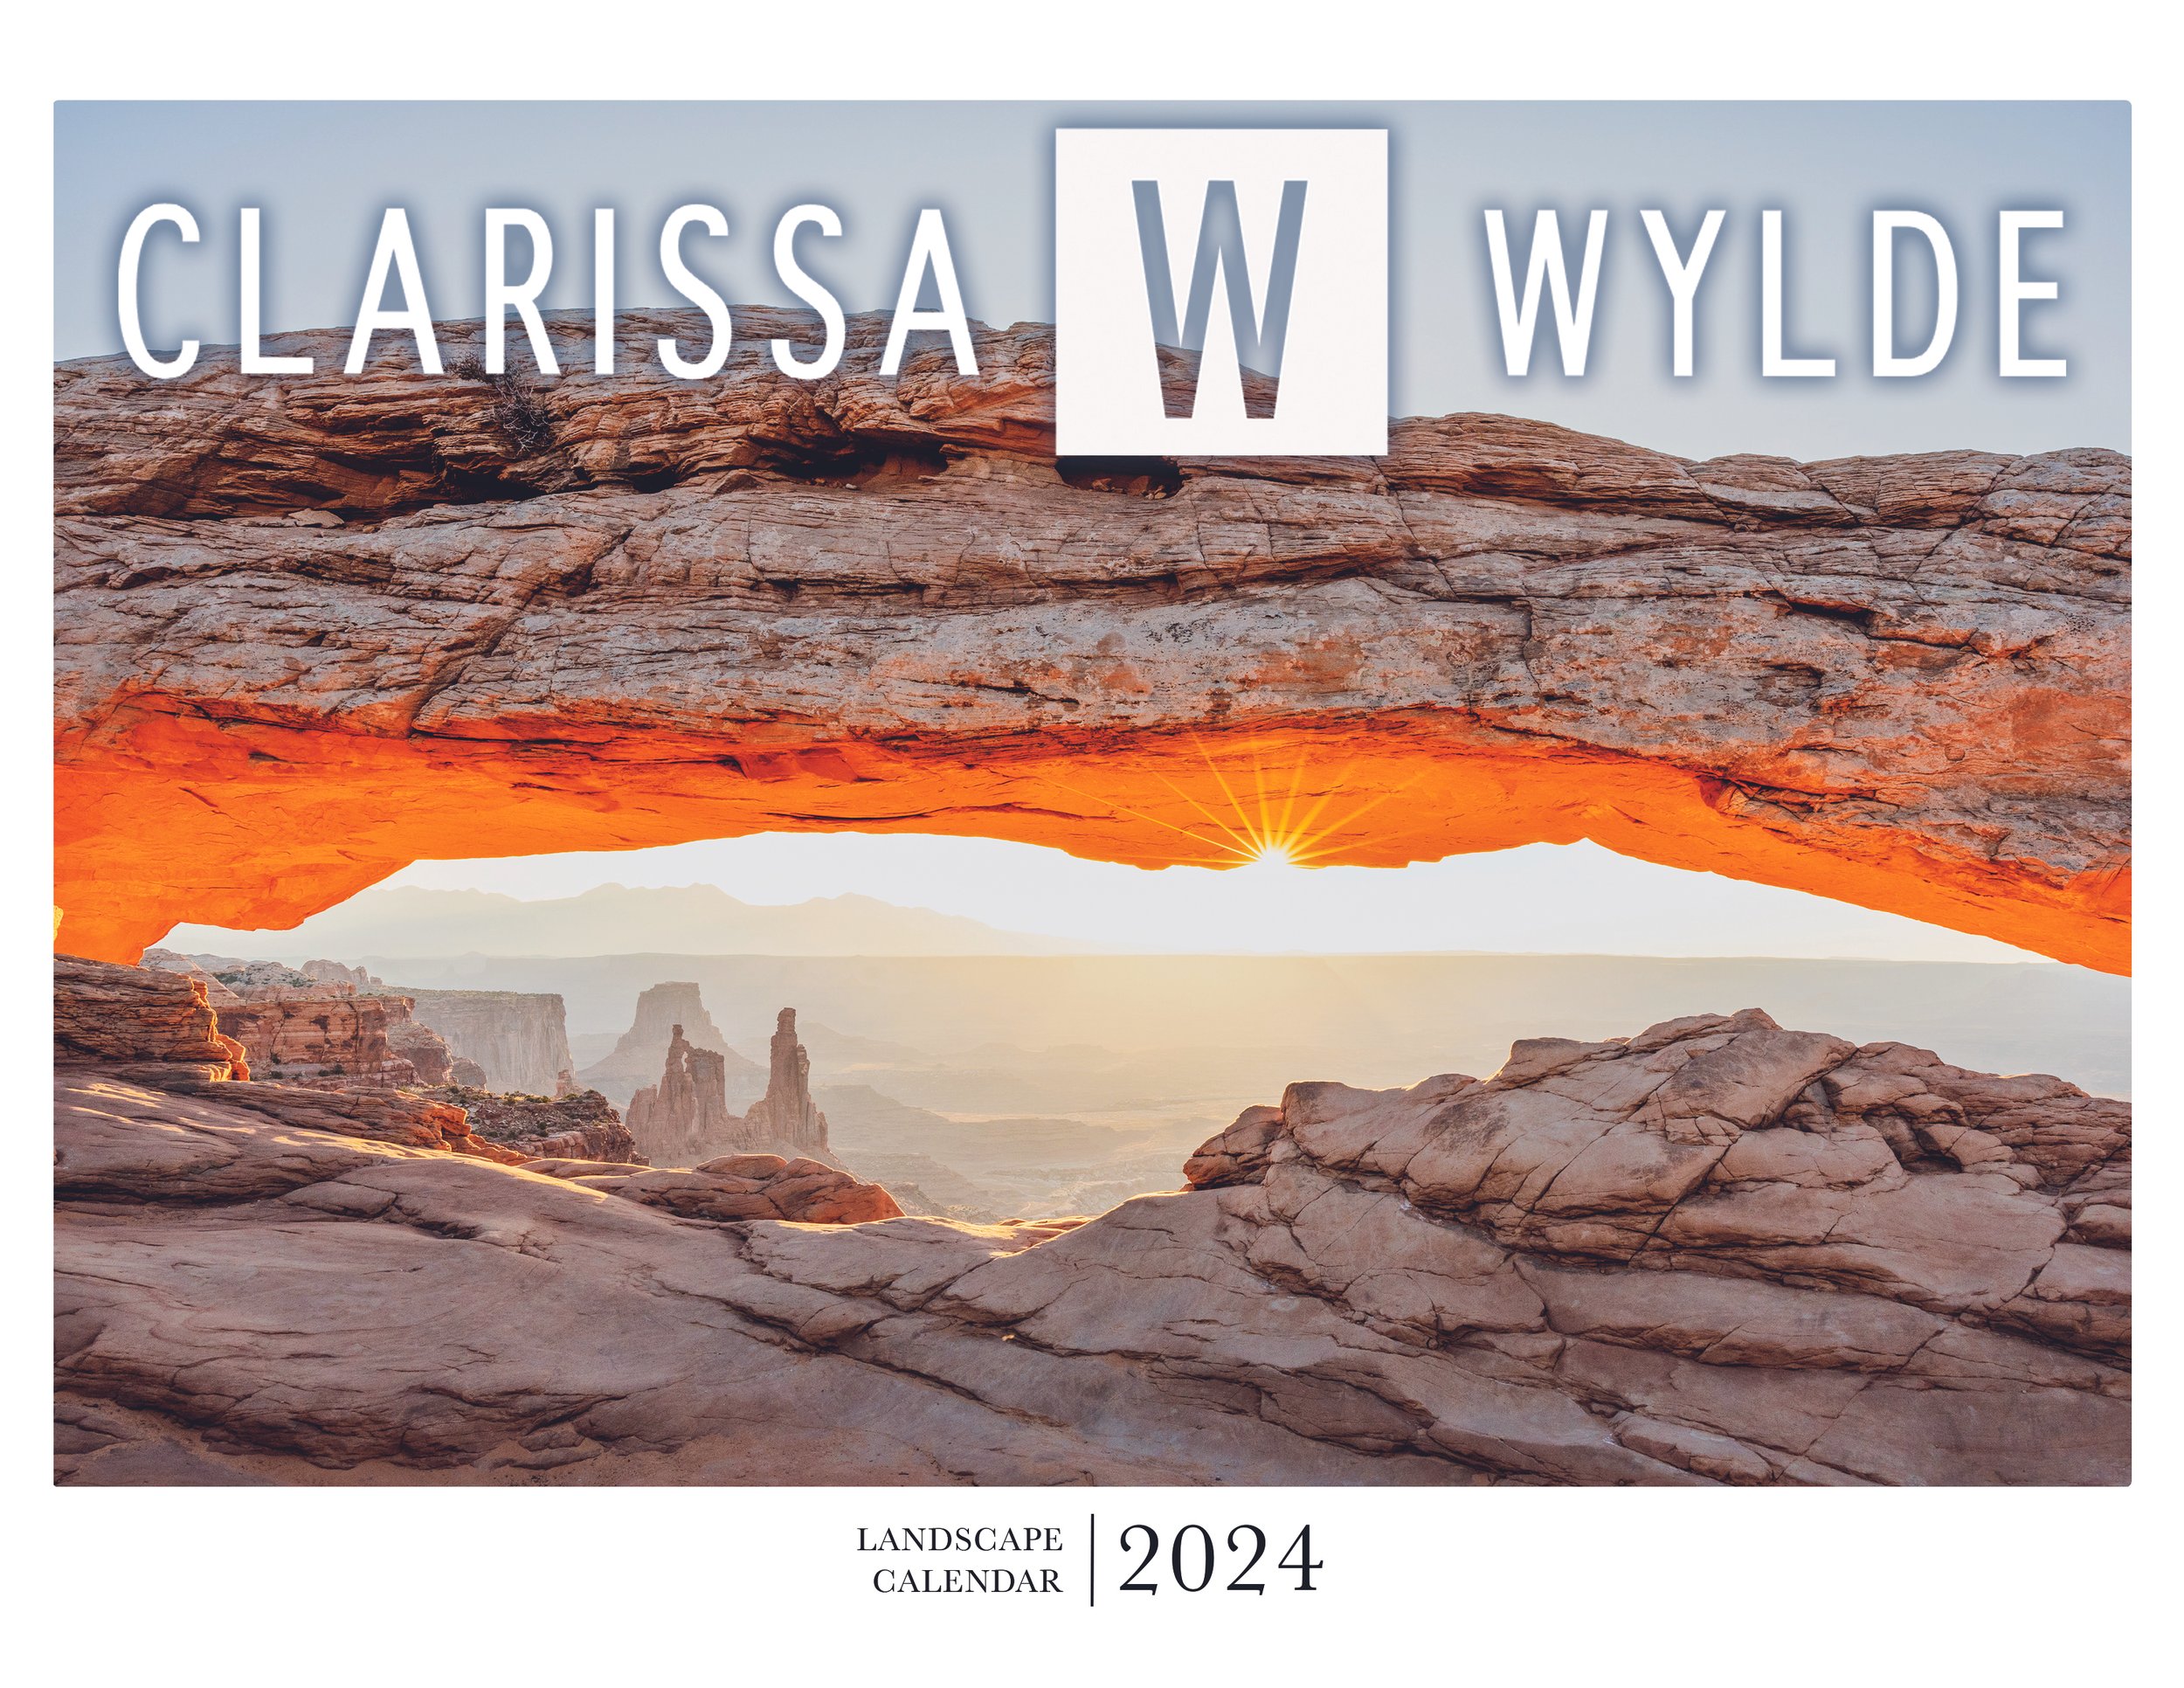  2024 Landscape Calendar: Available ONLY for preorder! The only way to get your calendar this year is through the preorder. Preorders close on December 9th. Don’t delay! Shipping in time for the New Year.  